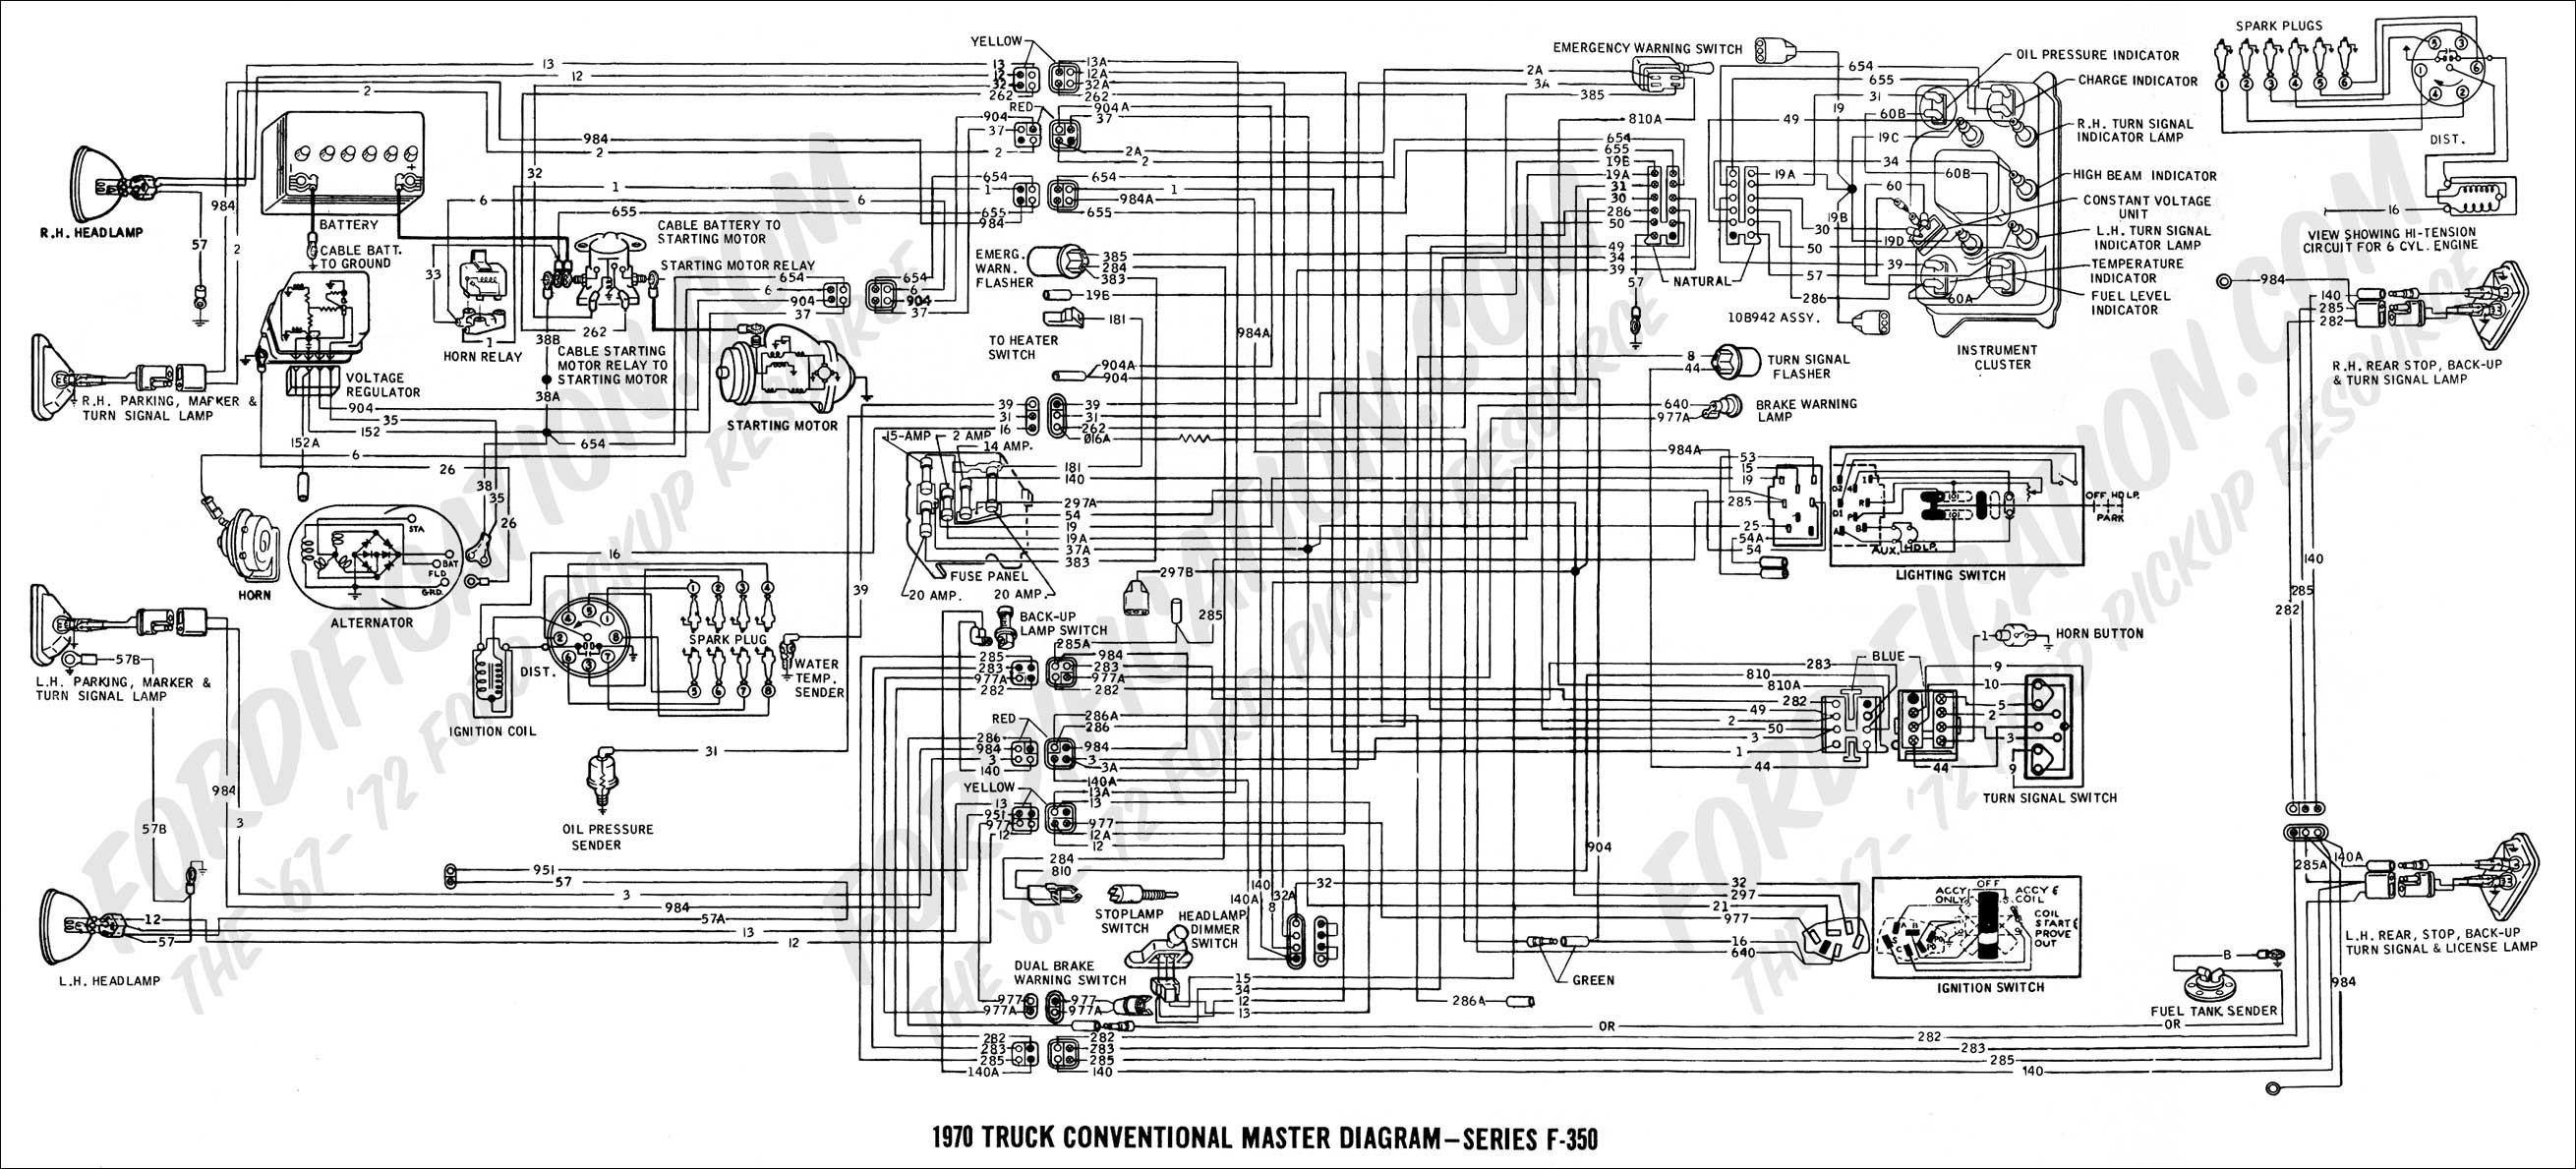 2006 Bmw 325Xi Right Tail Light Wiring Diagram from mainetreasurechest.com